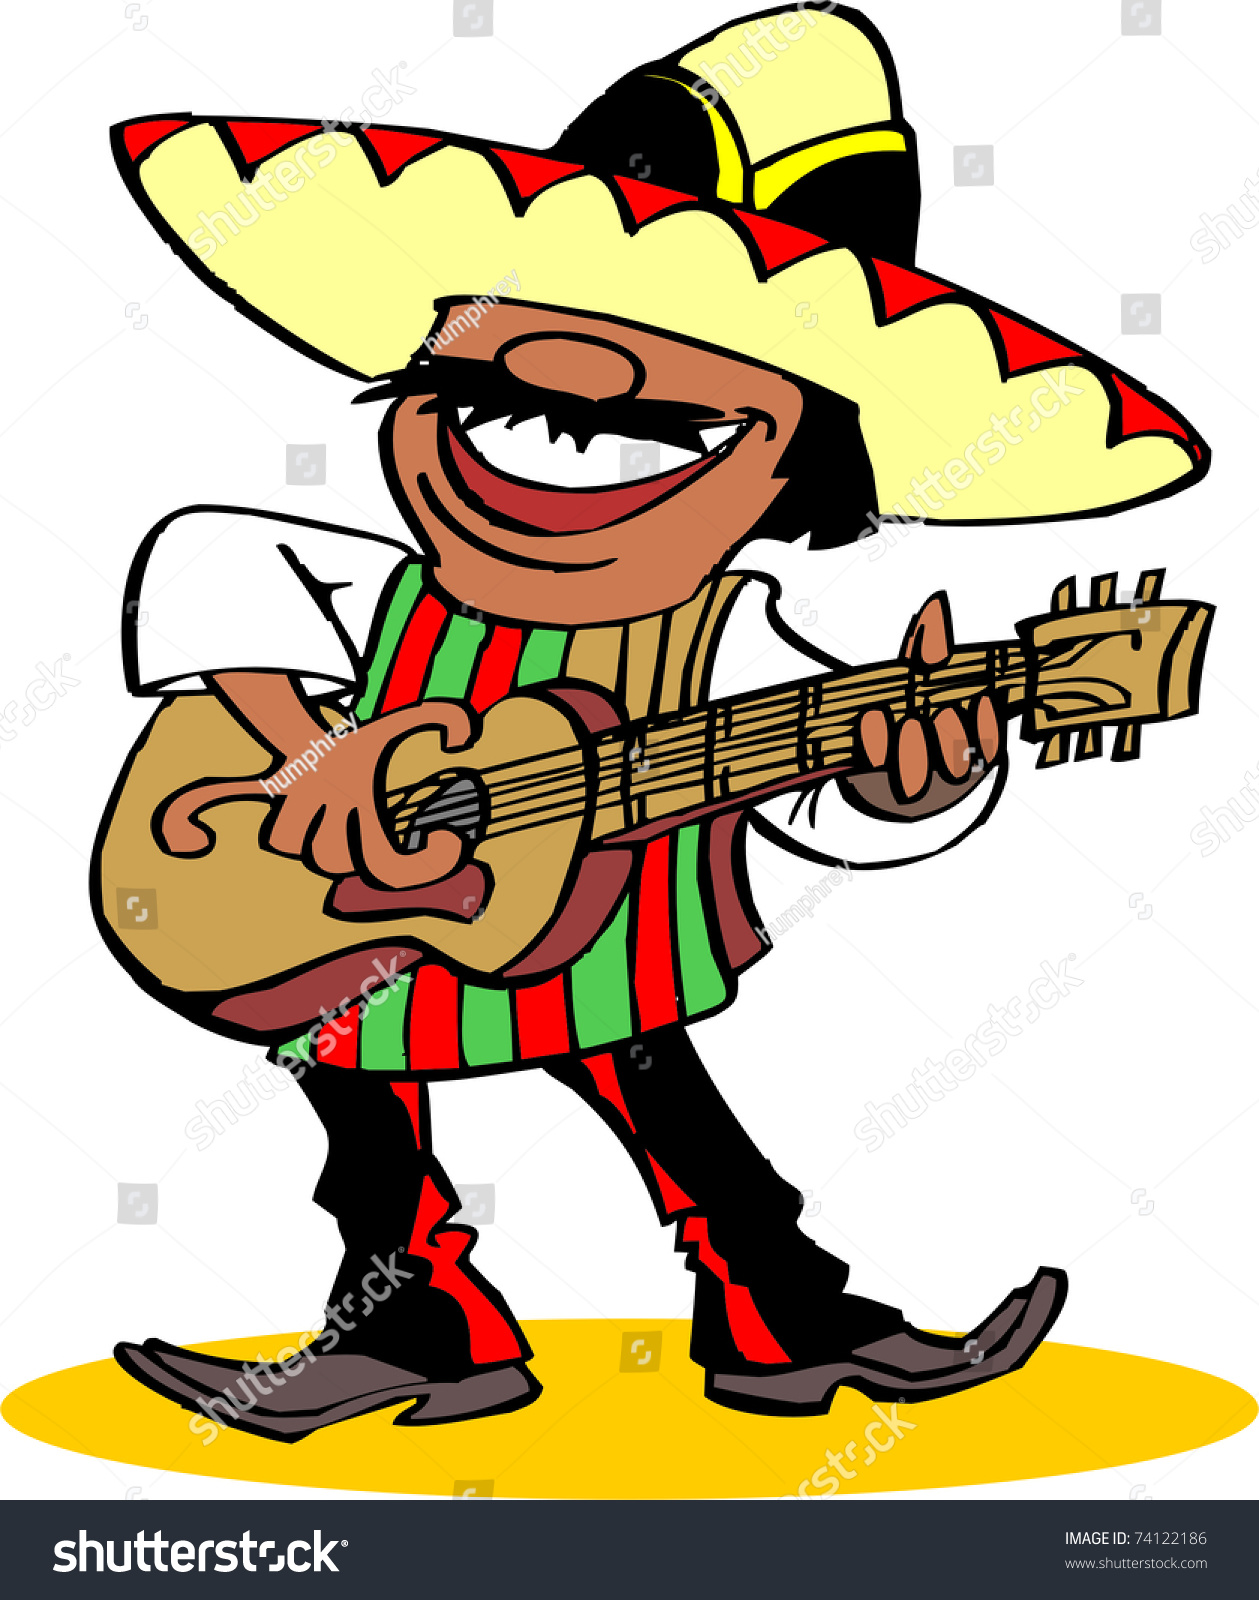 free vector mexican clipart - photo #32